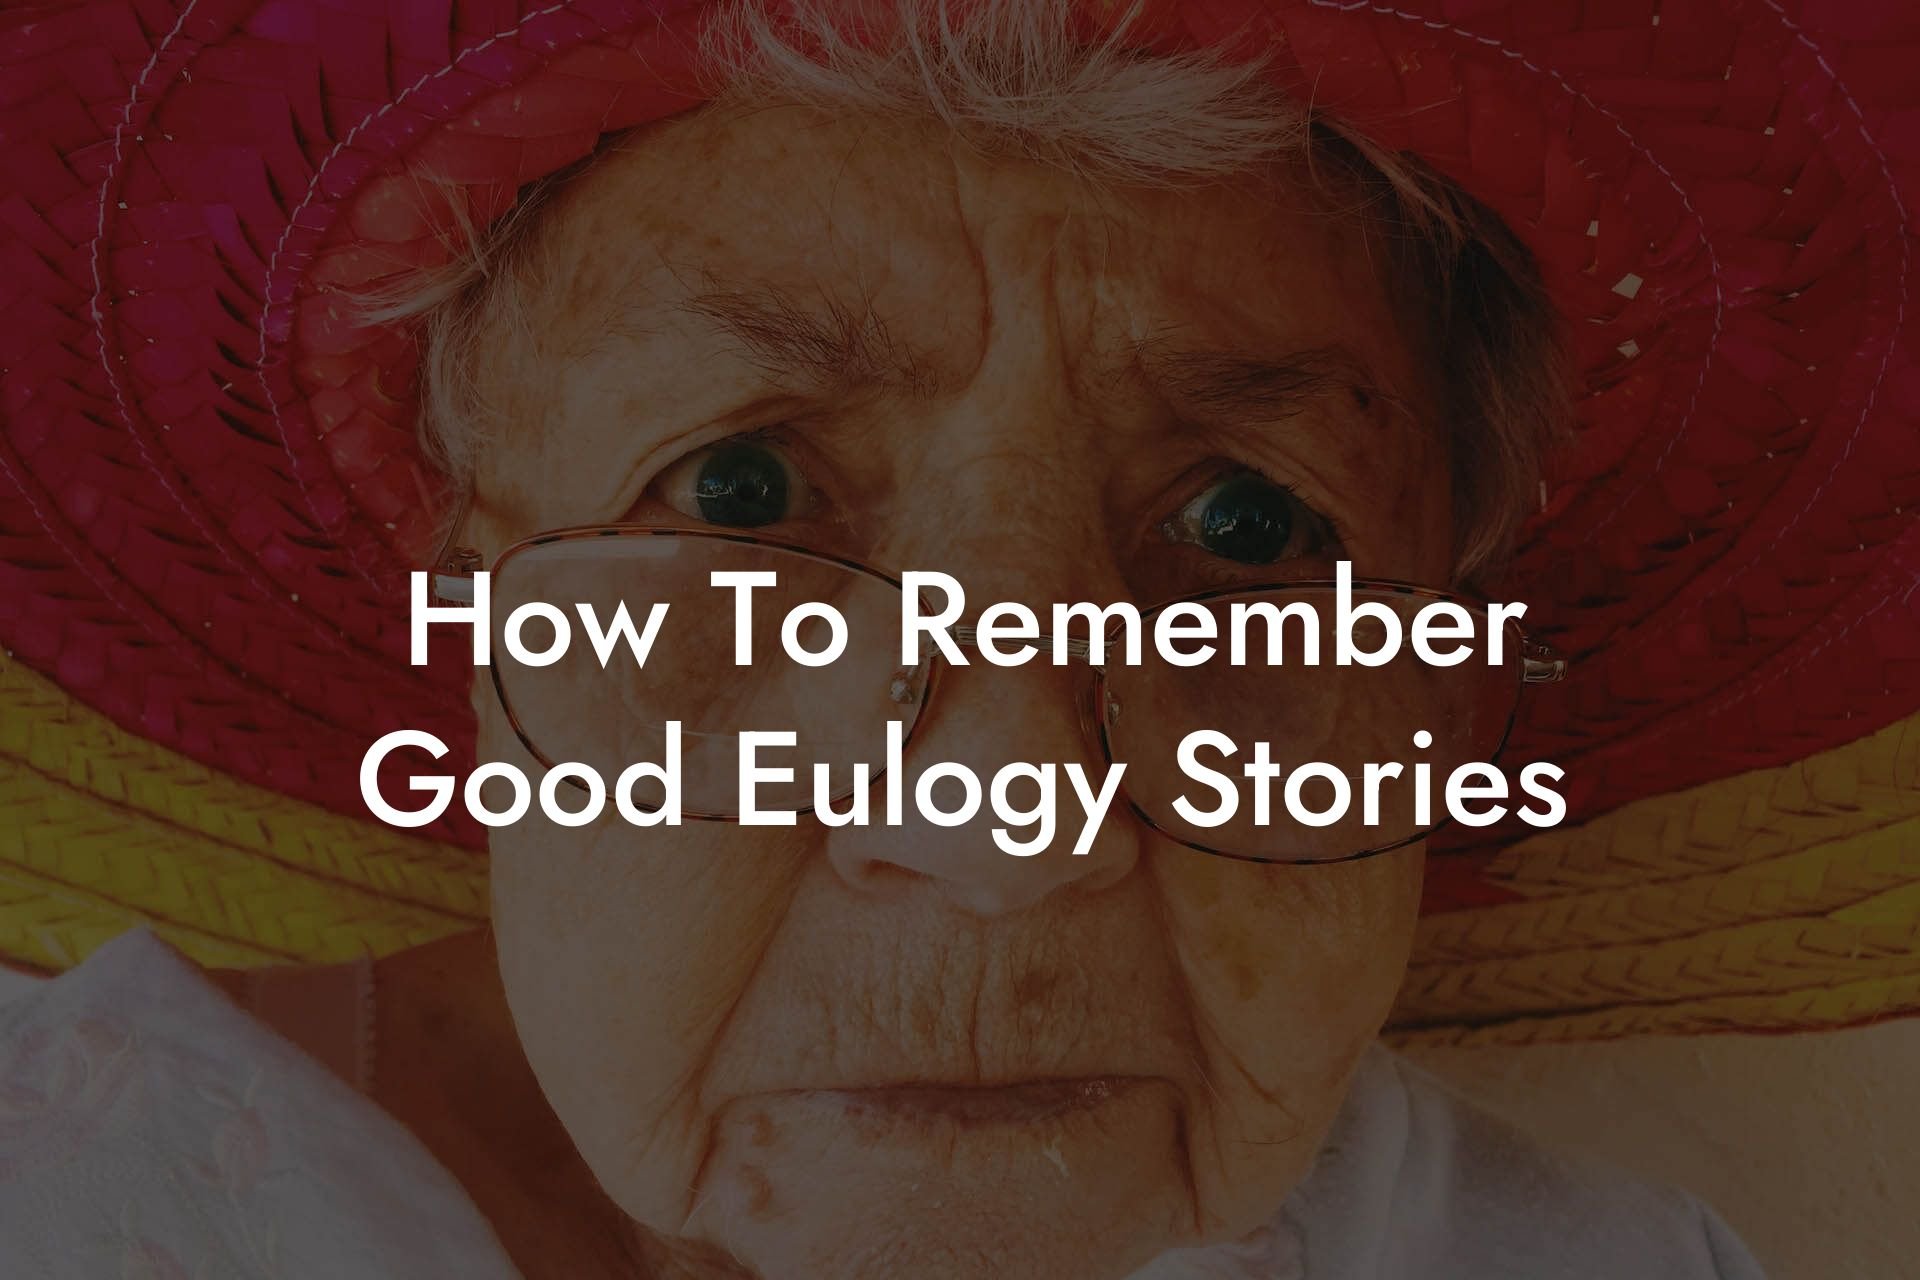 How To Remember Good Eulogy Stories